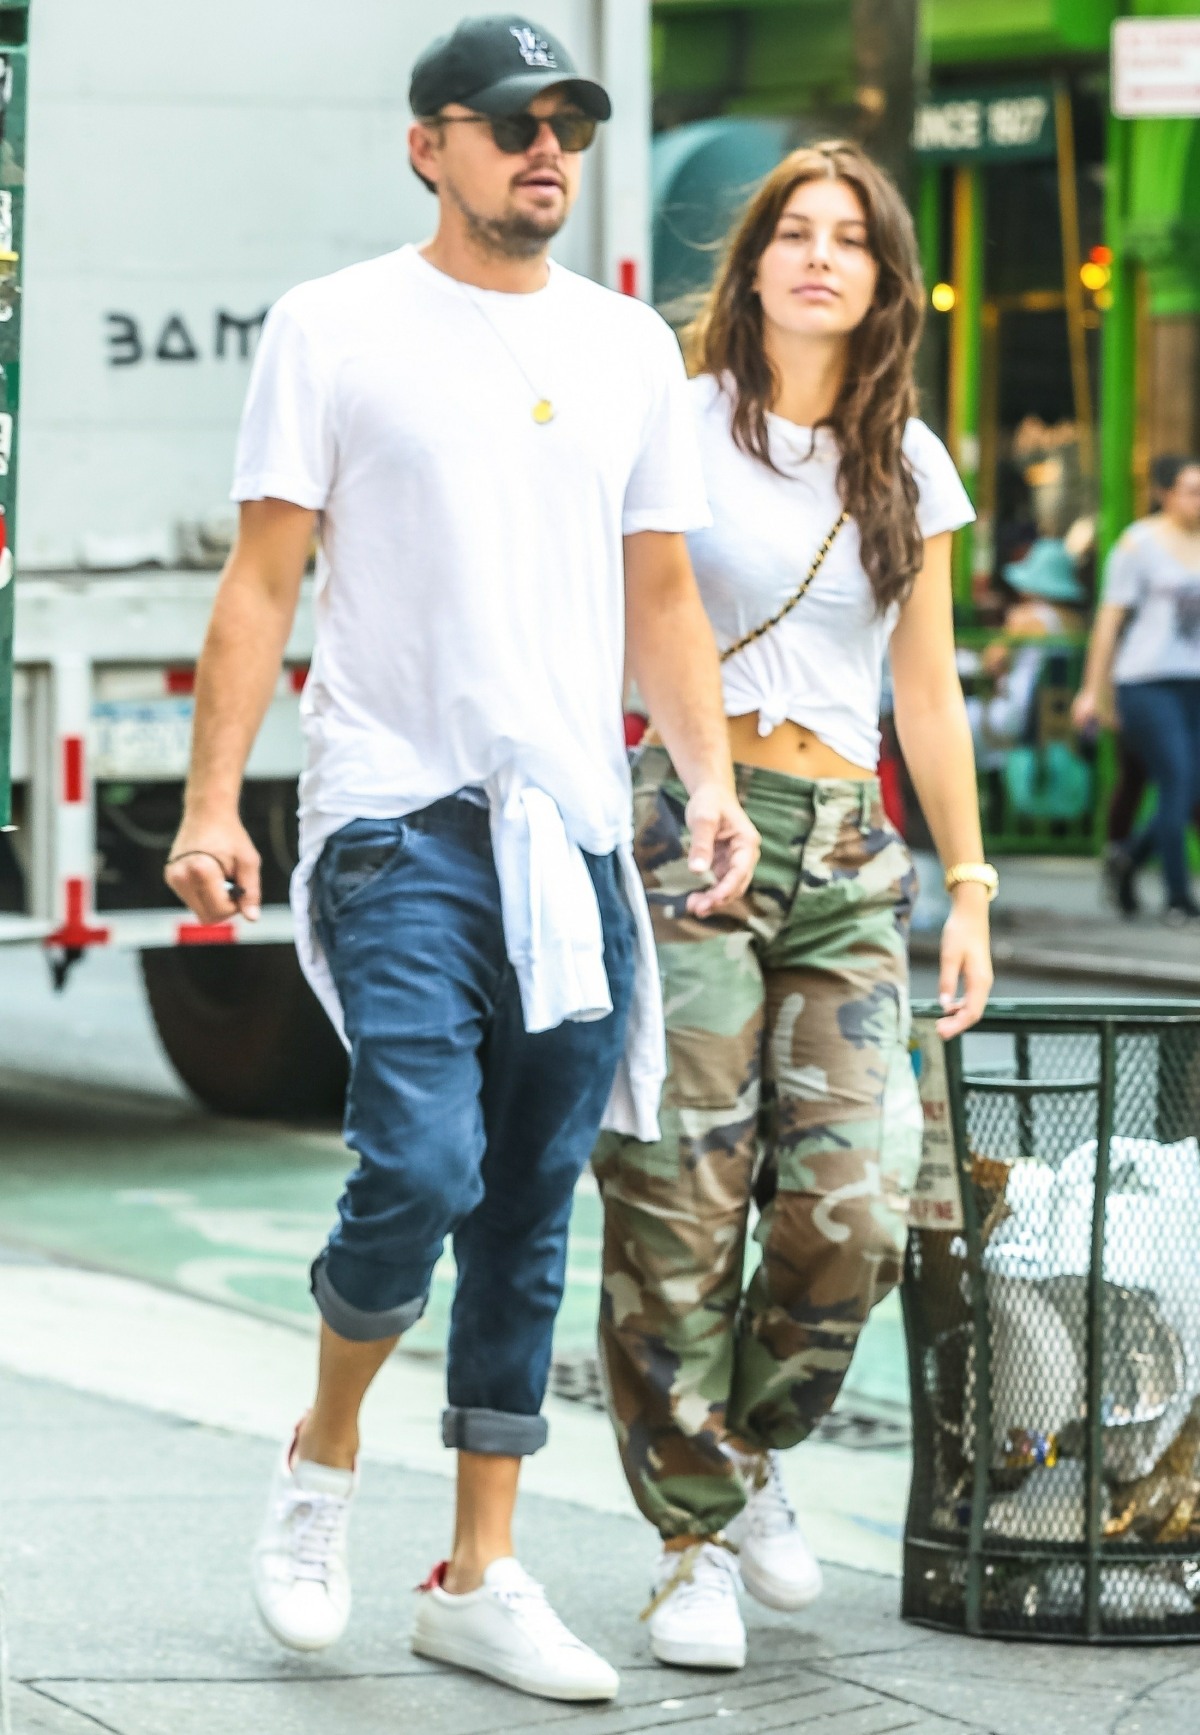 Leonardo DiCaprio hangs out with girlfriend Camila Morrone in the West Village